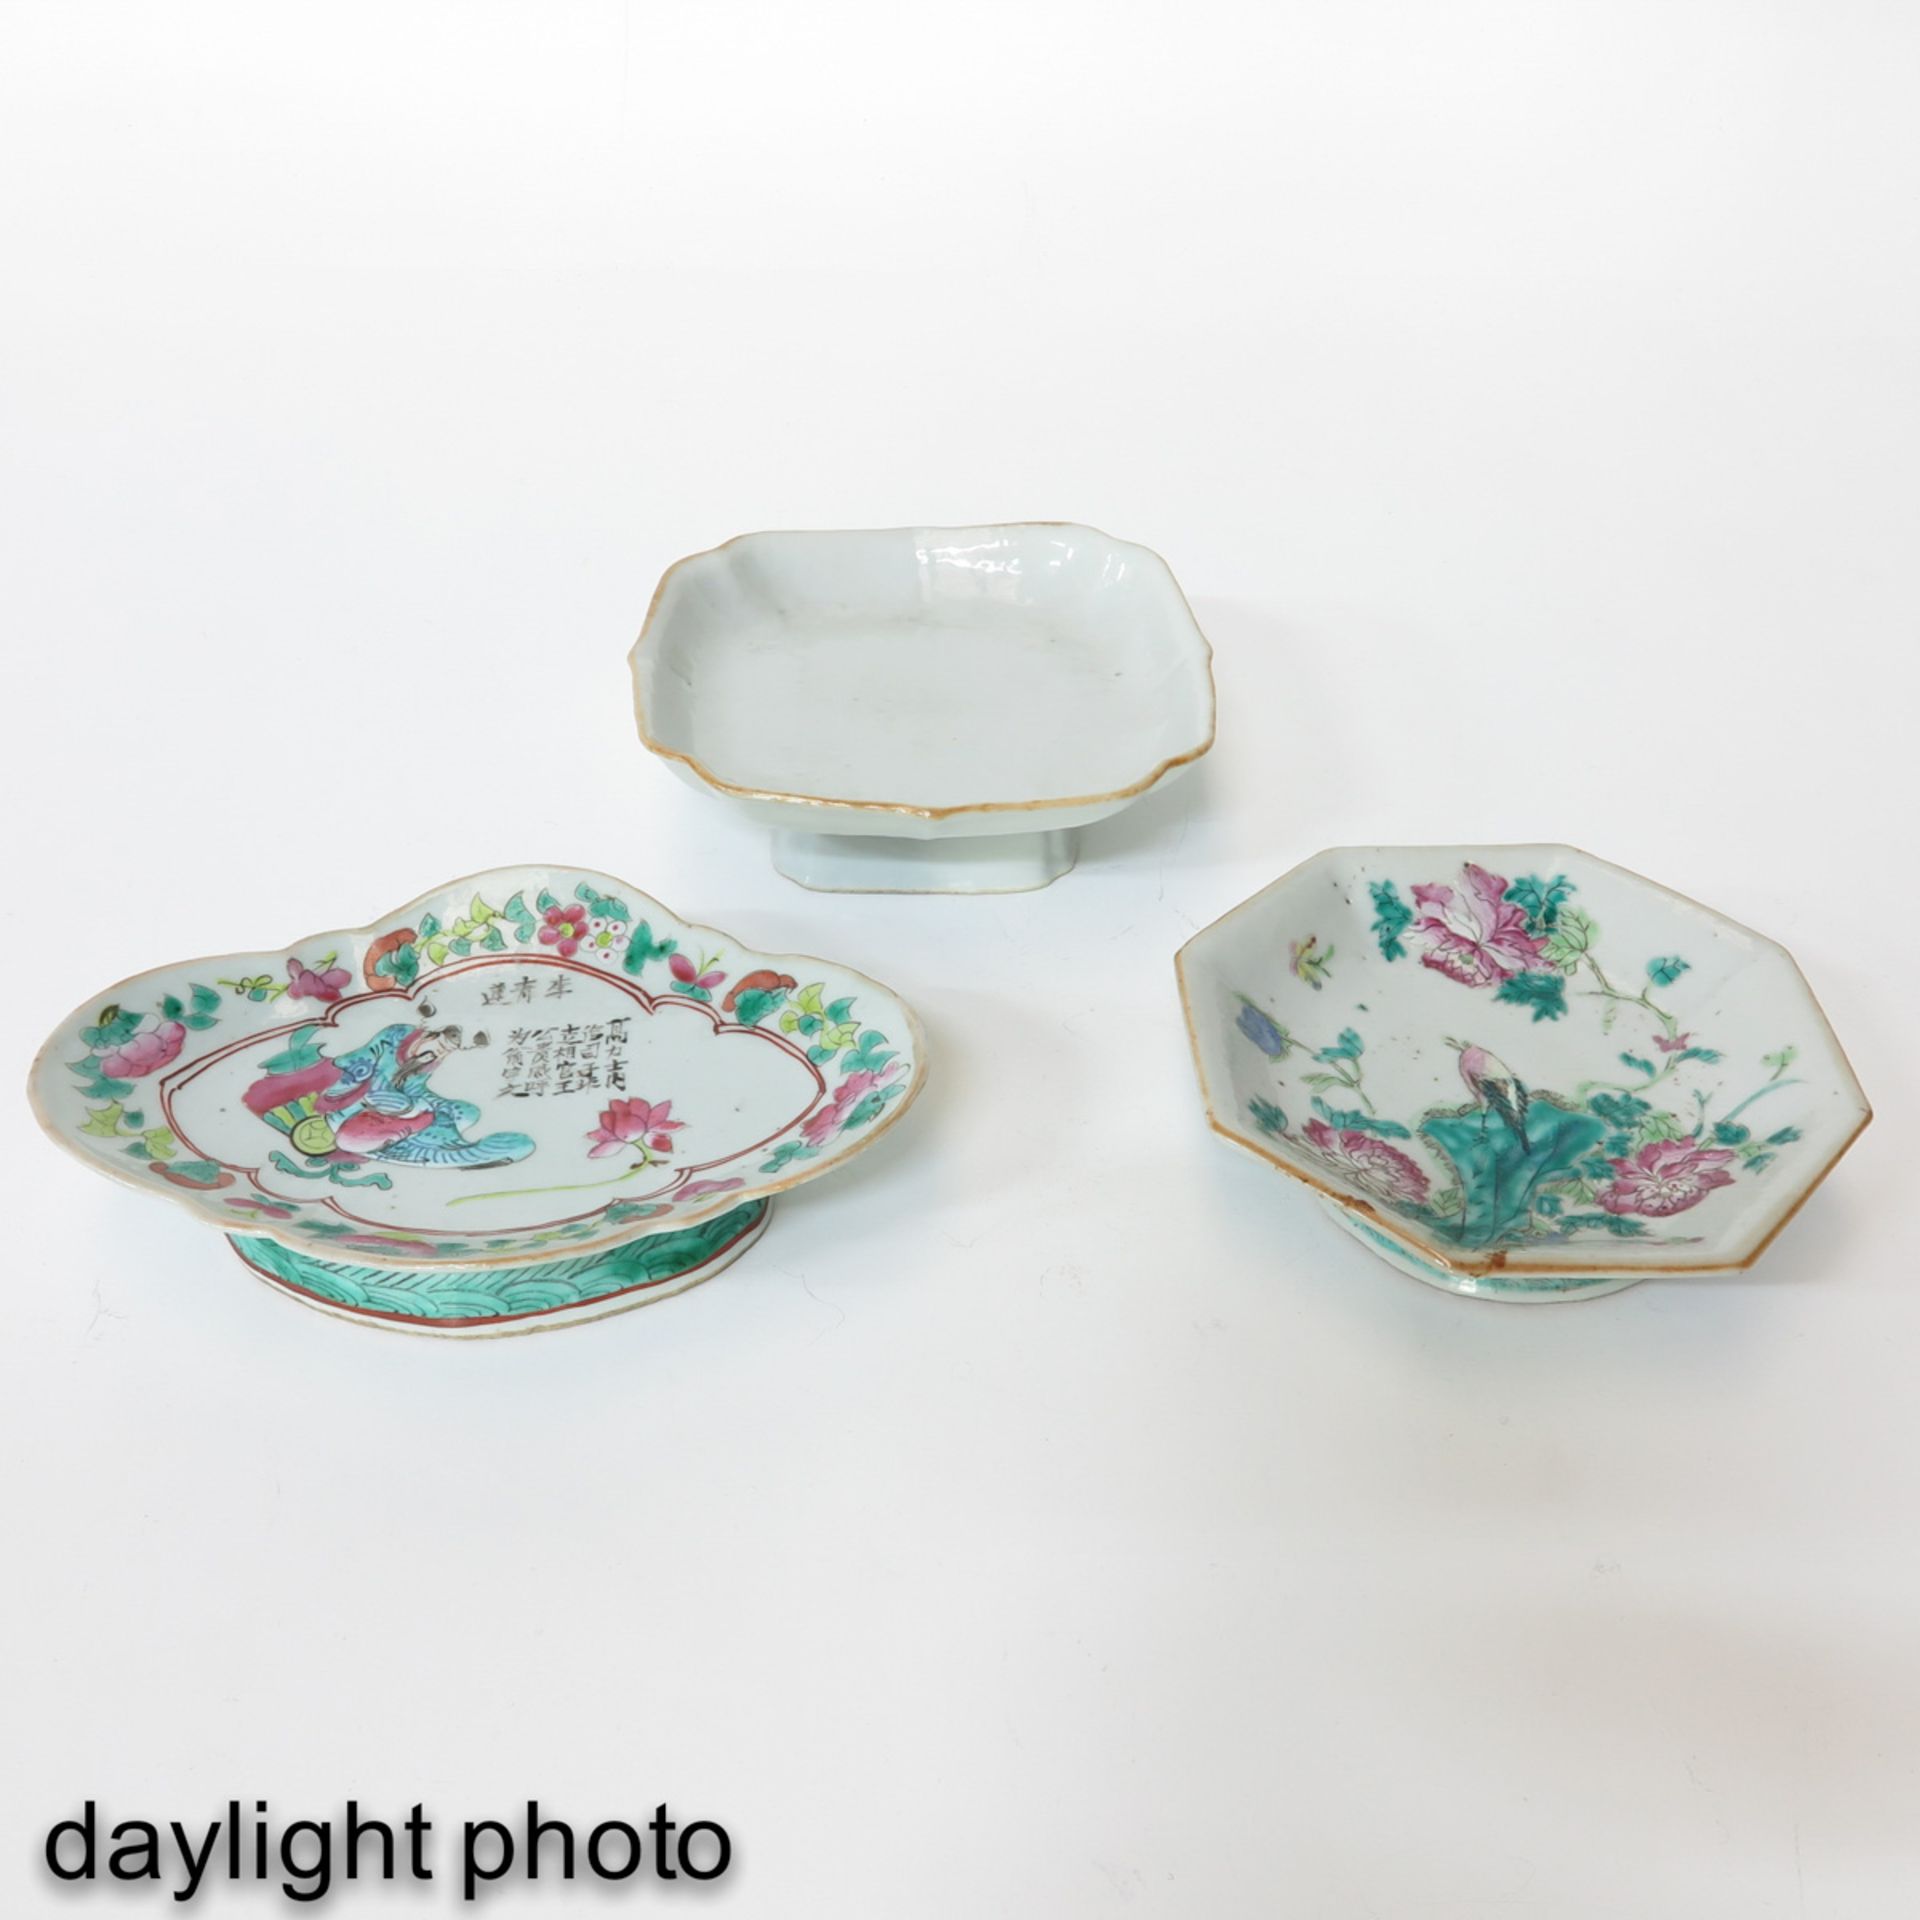 A Collection of 3 Altar Dishes - Image 7 of 10